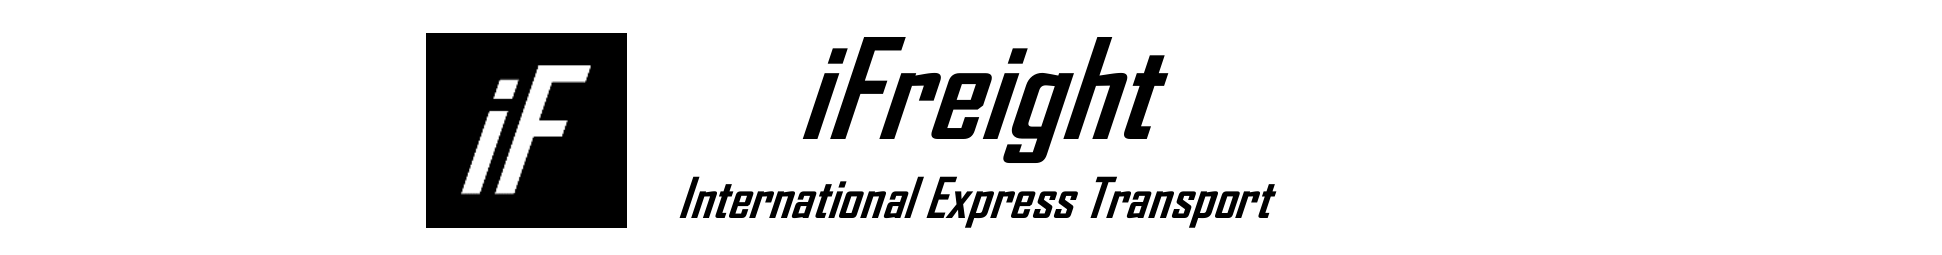 iFreight